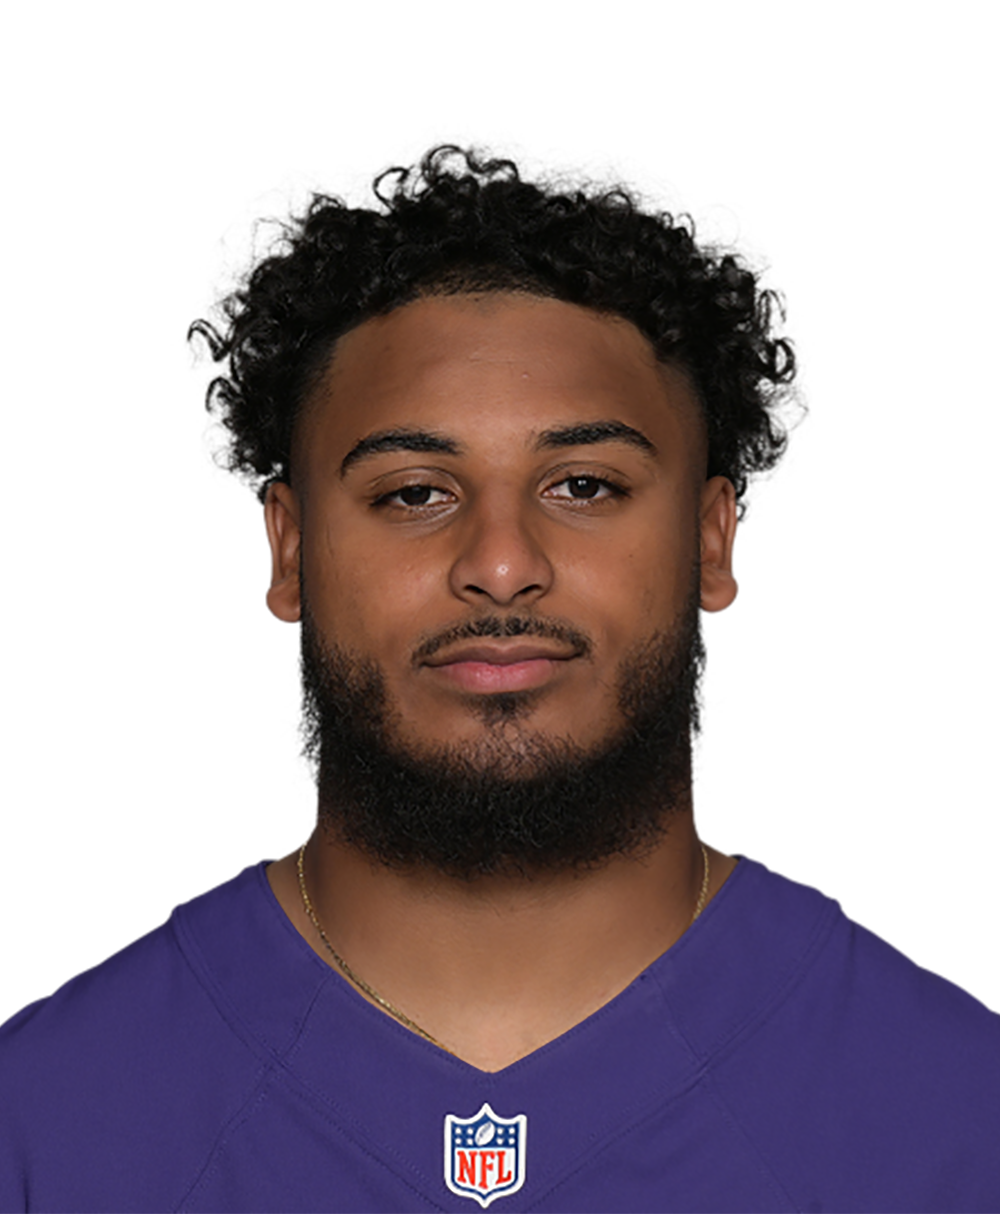 We have re-signed S Geno Stone. - Baltimore Ravens